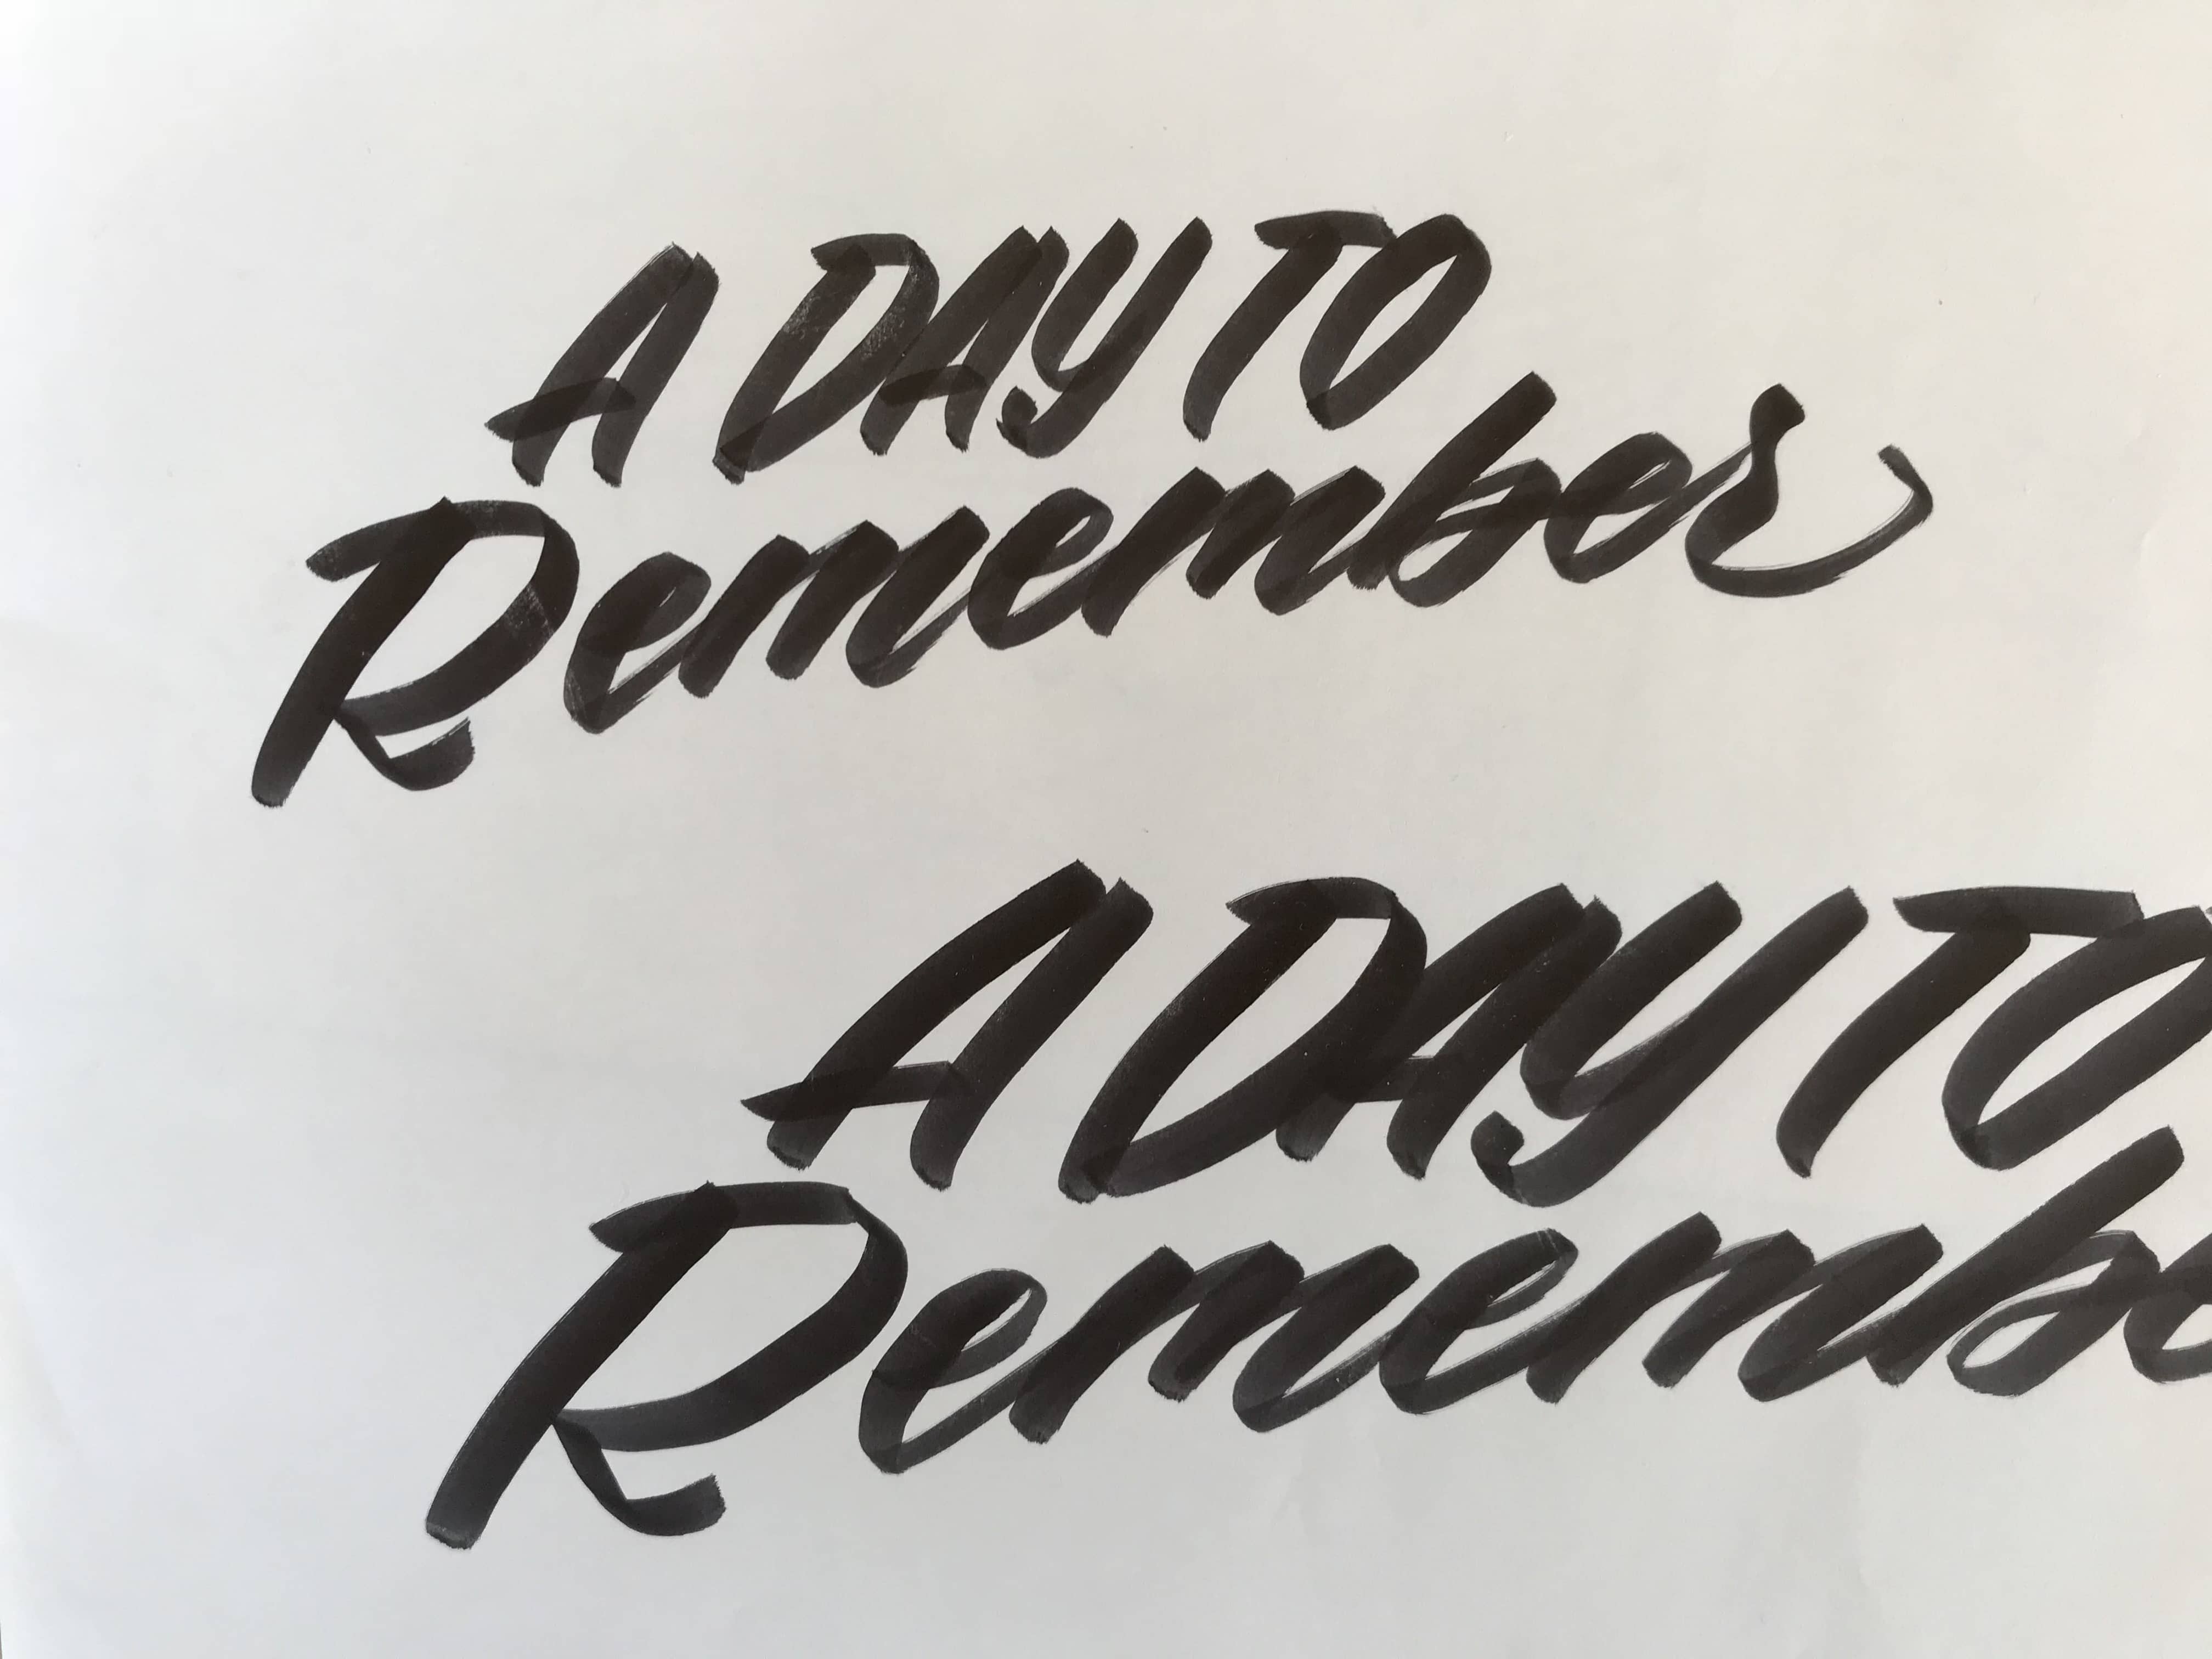 A Day To Remember 15-year tour brush lettering t-shirt design